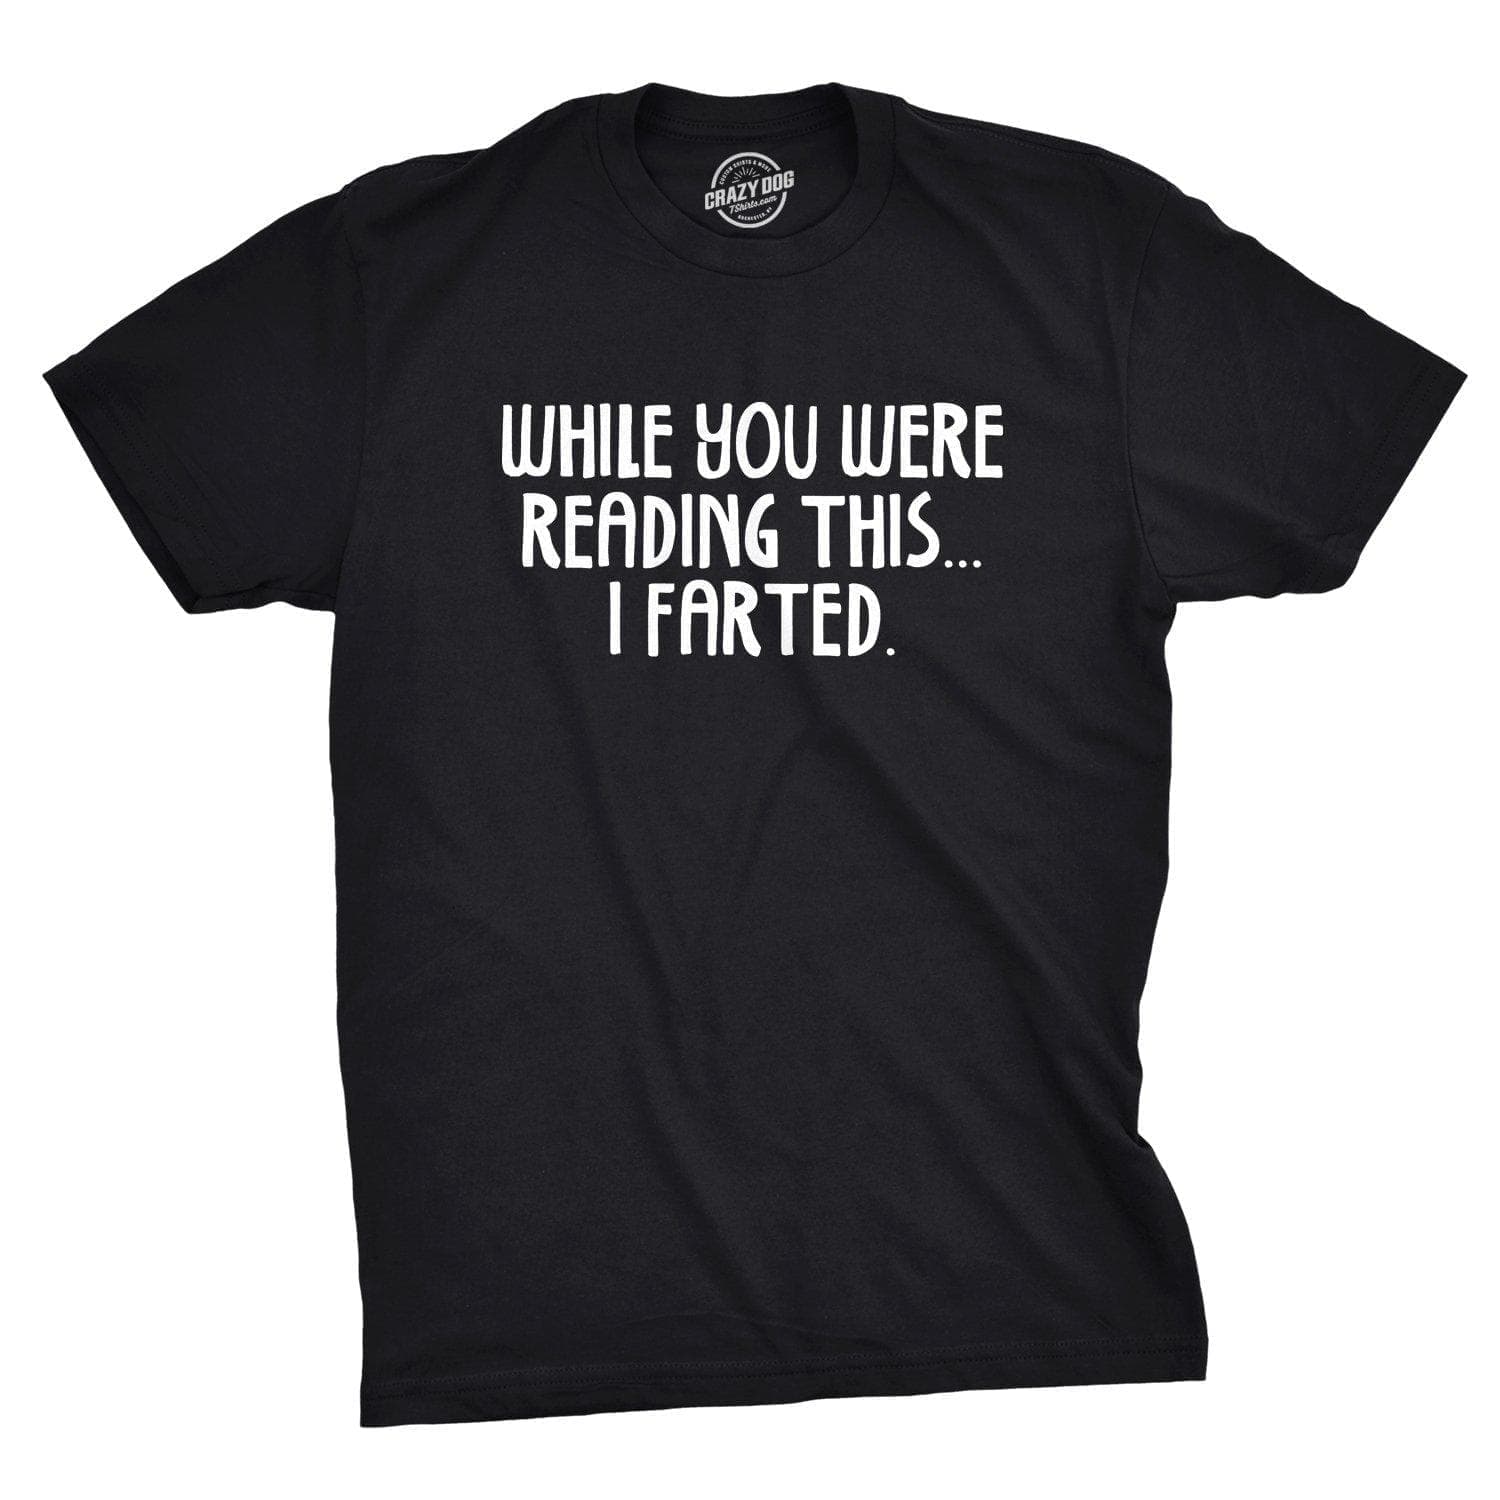 While You Were Reading This I Farted Men's Tshirt  -  Crazy Dog T-Shirts